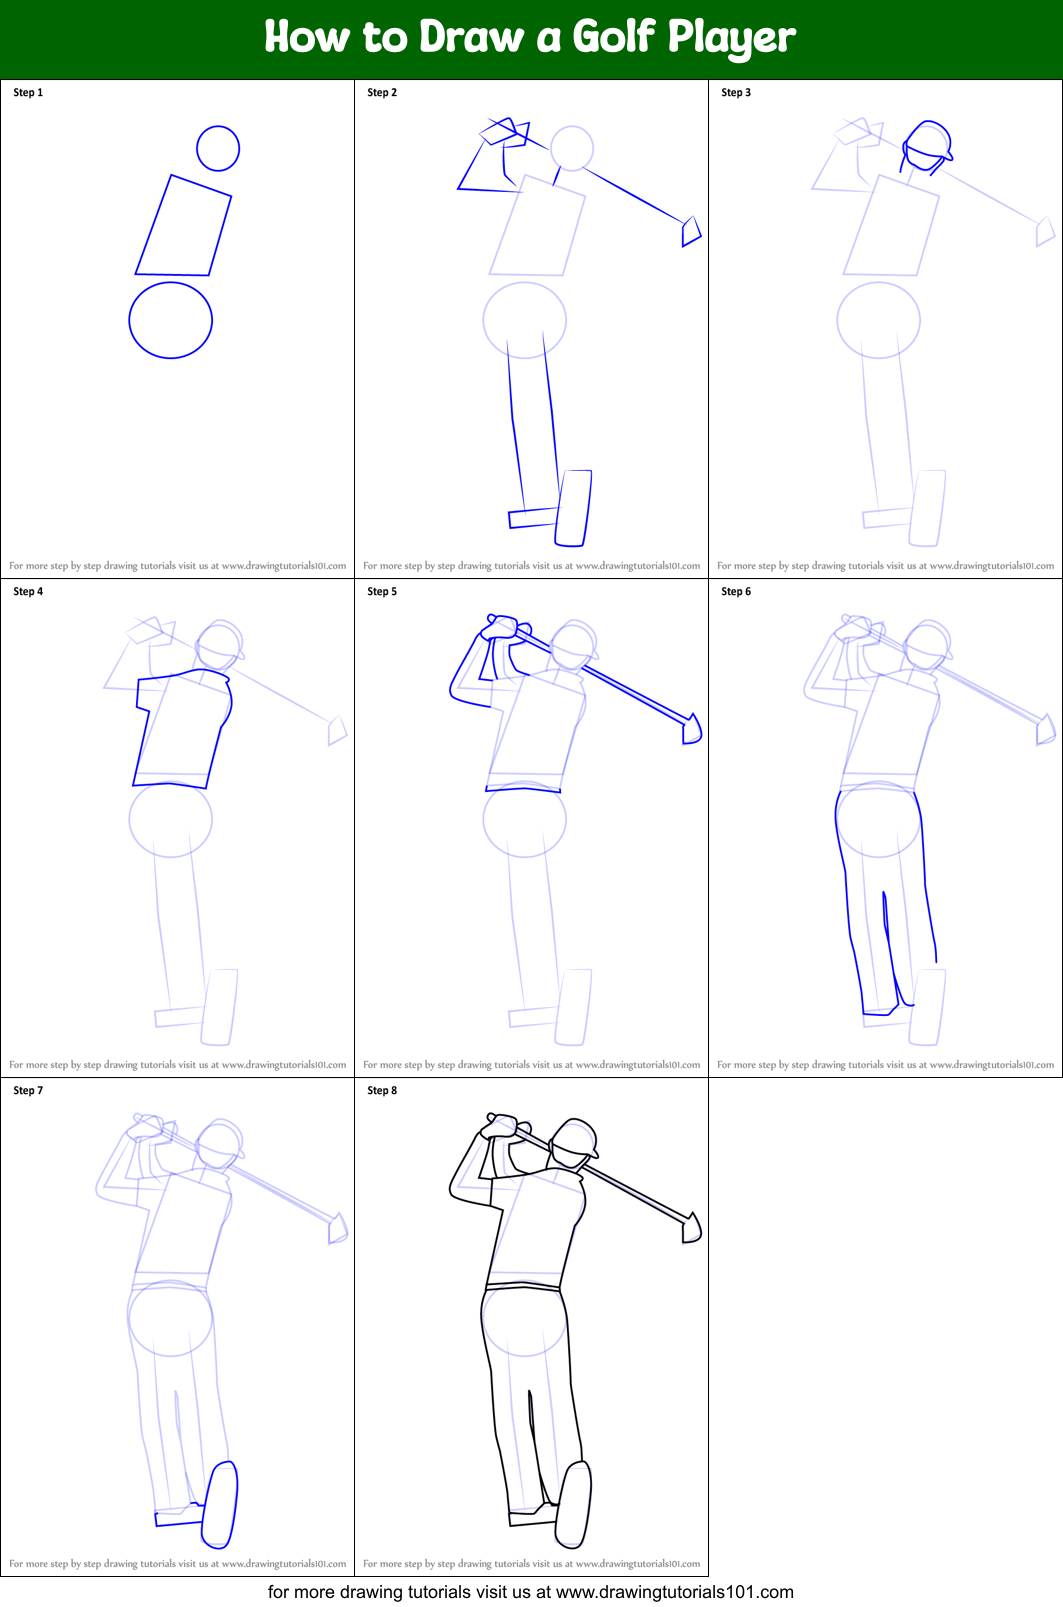 How to Draw a Golf Player printable step by step drawing sheet